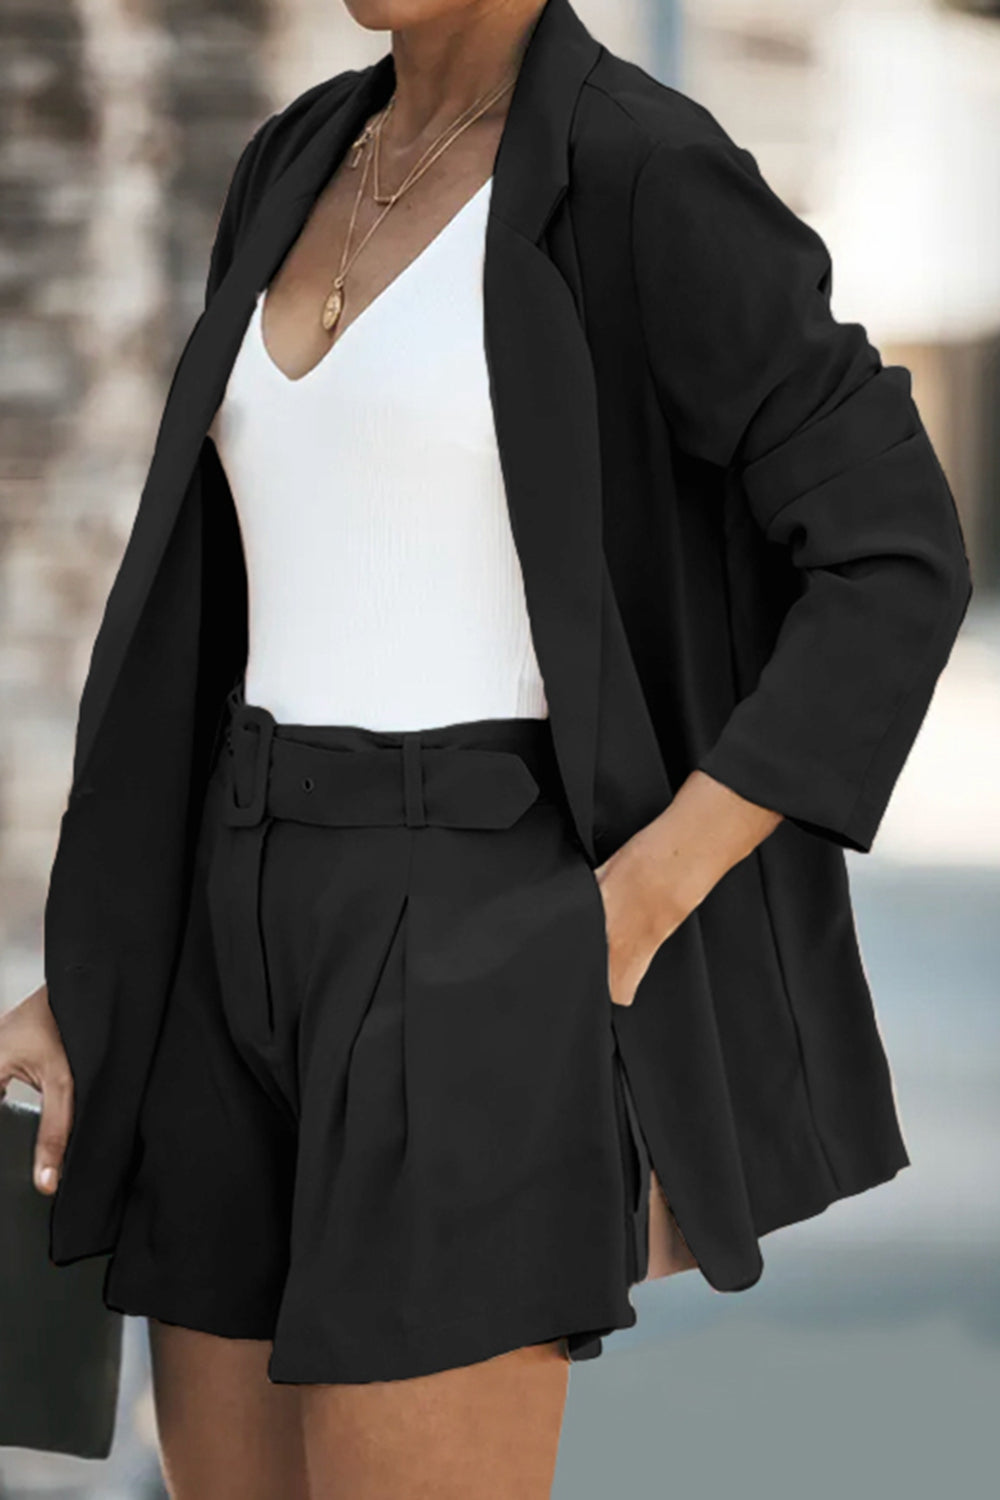 Longline Blazer and Shorts Set with Pockets - 5 colors